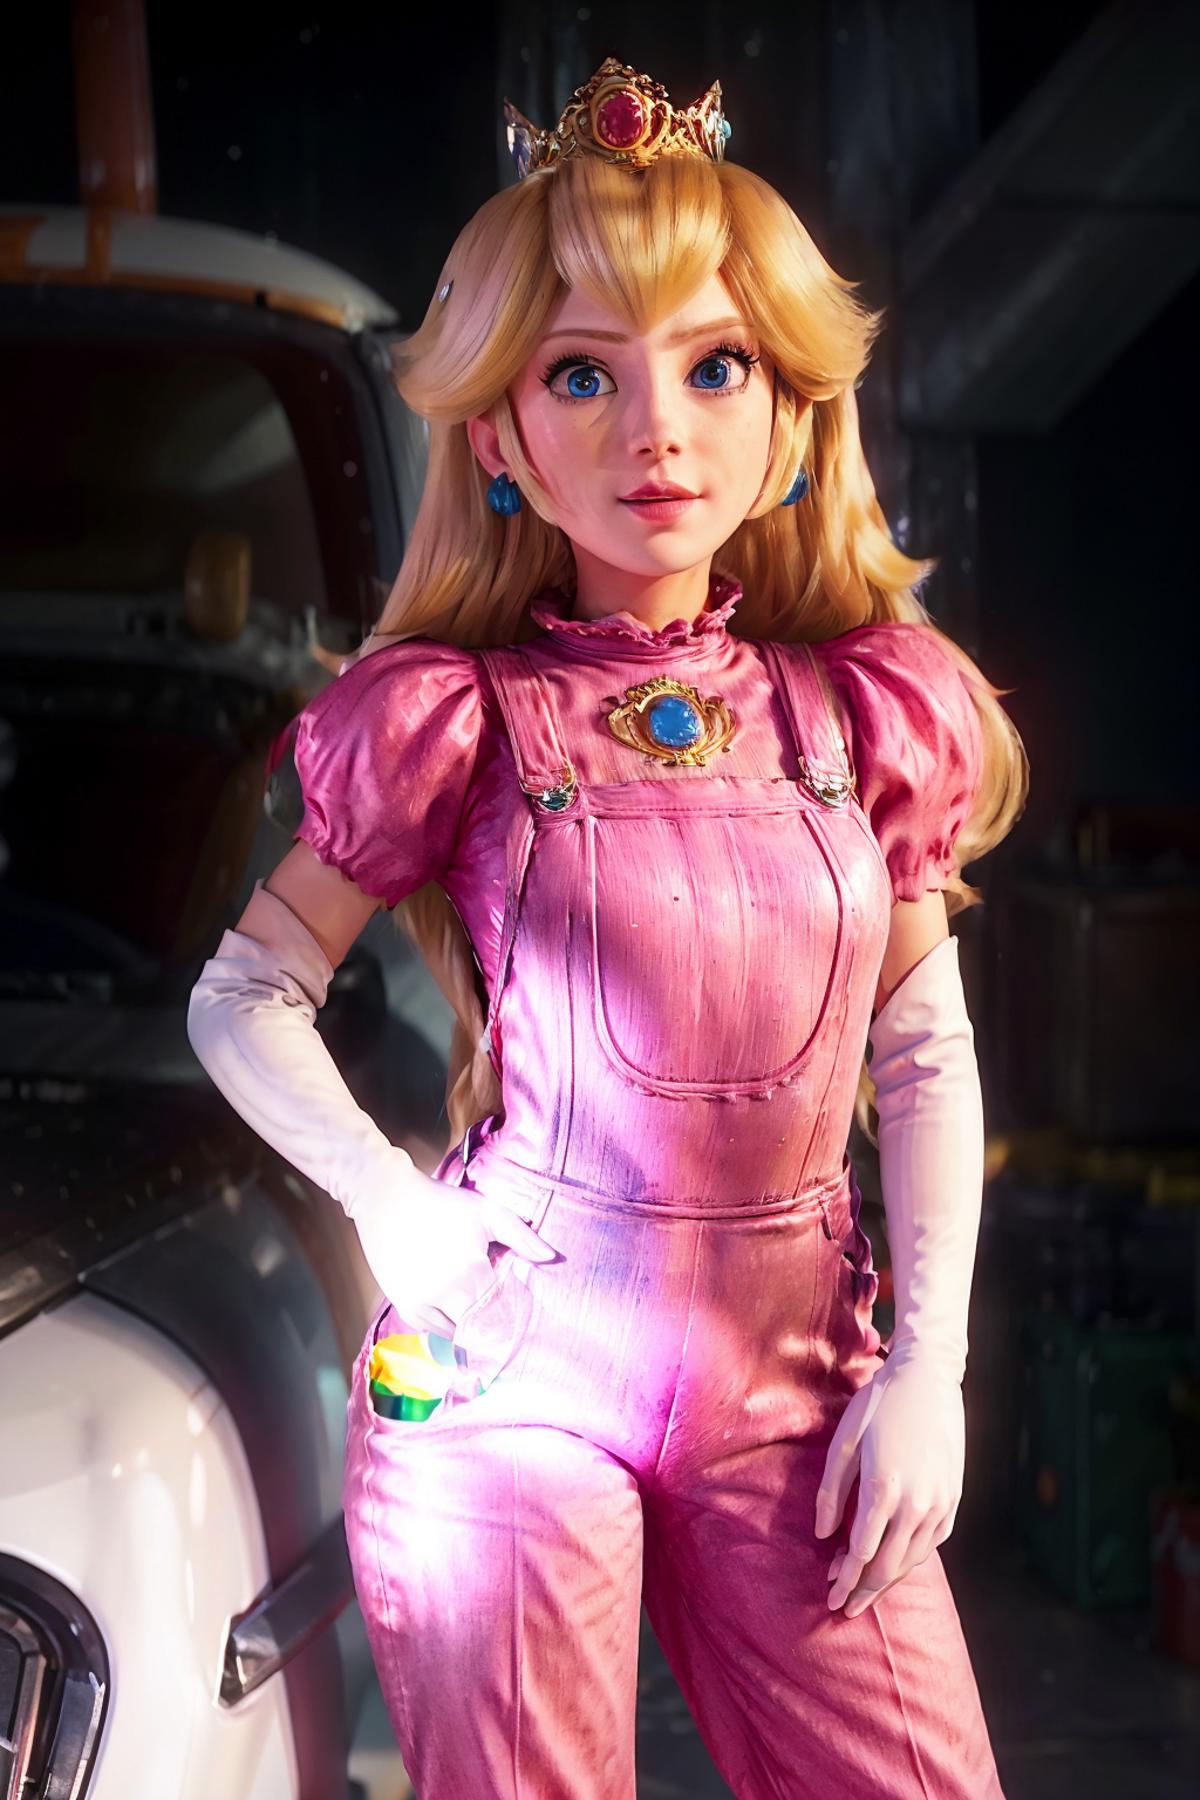 A doll with blue eyes, wearing a pink dress and overalls, is standing next to a car.